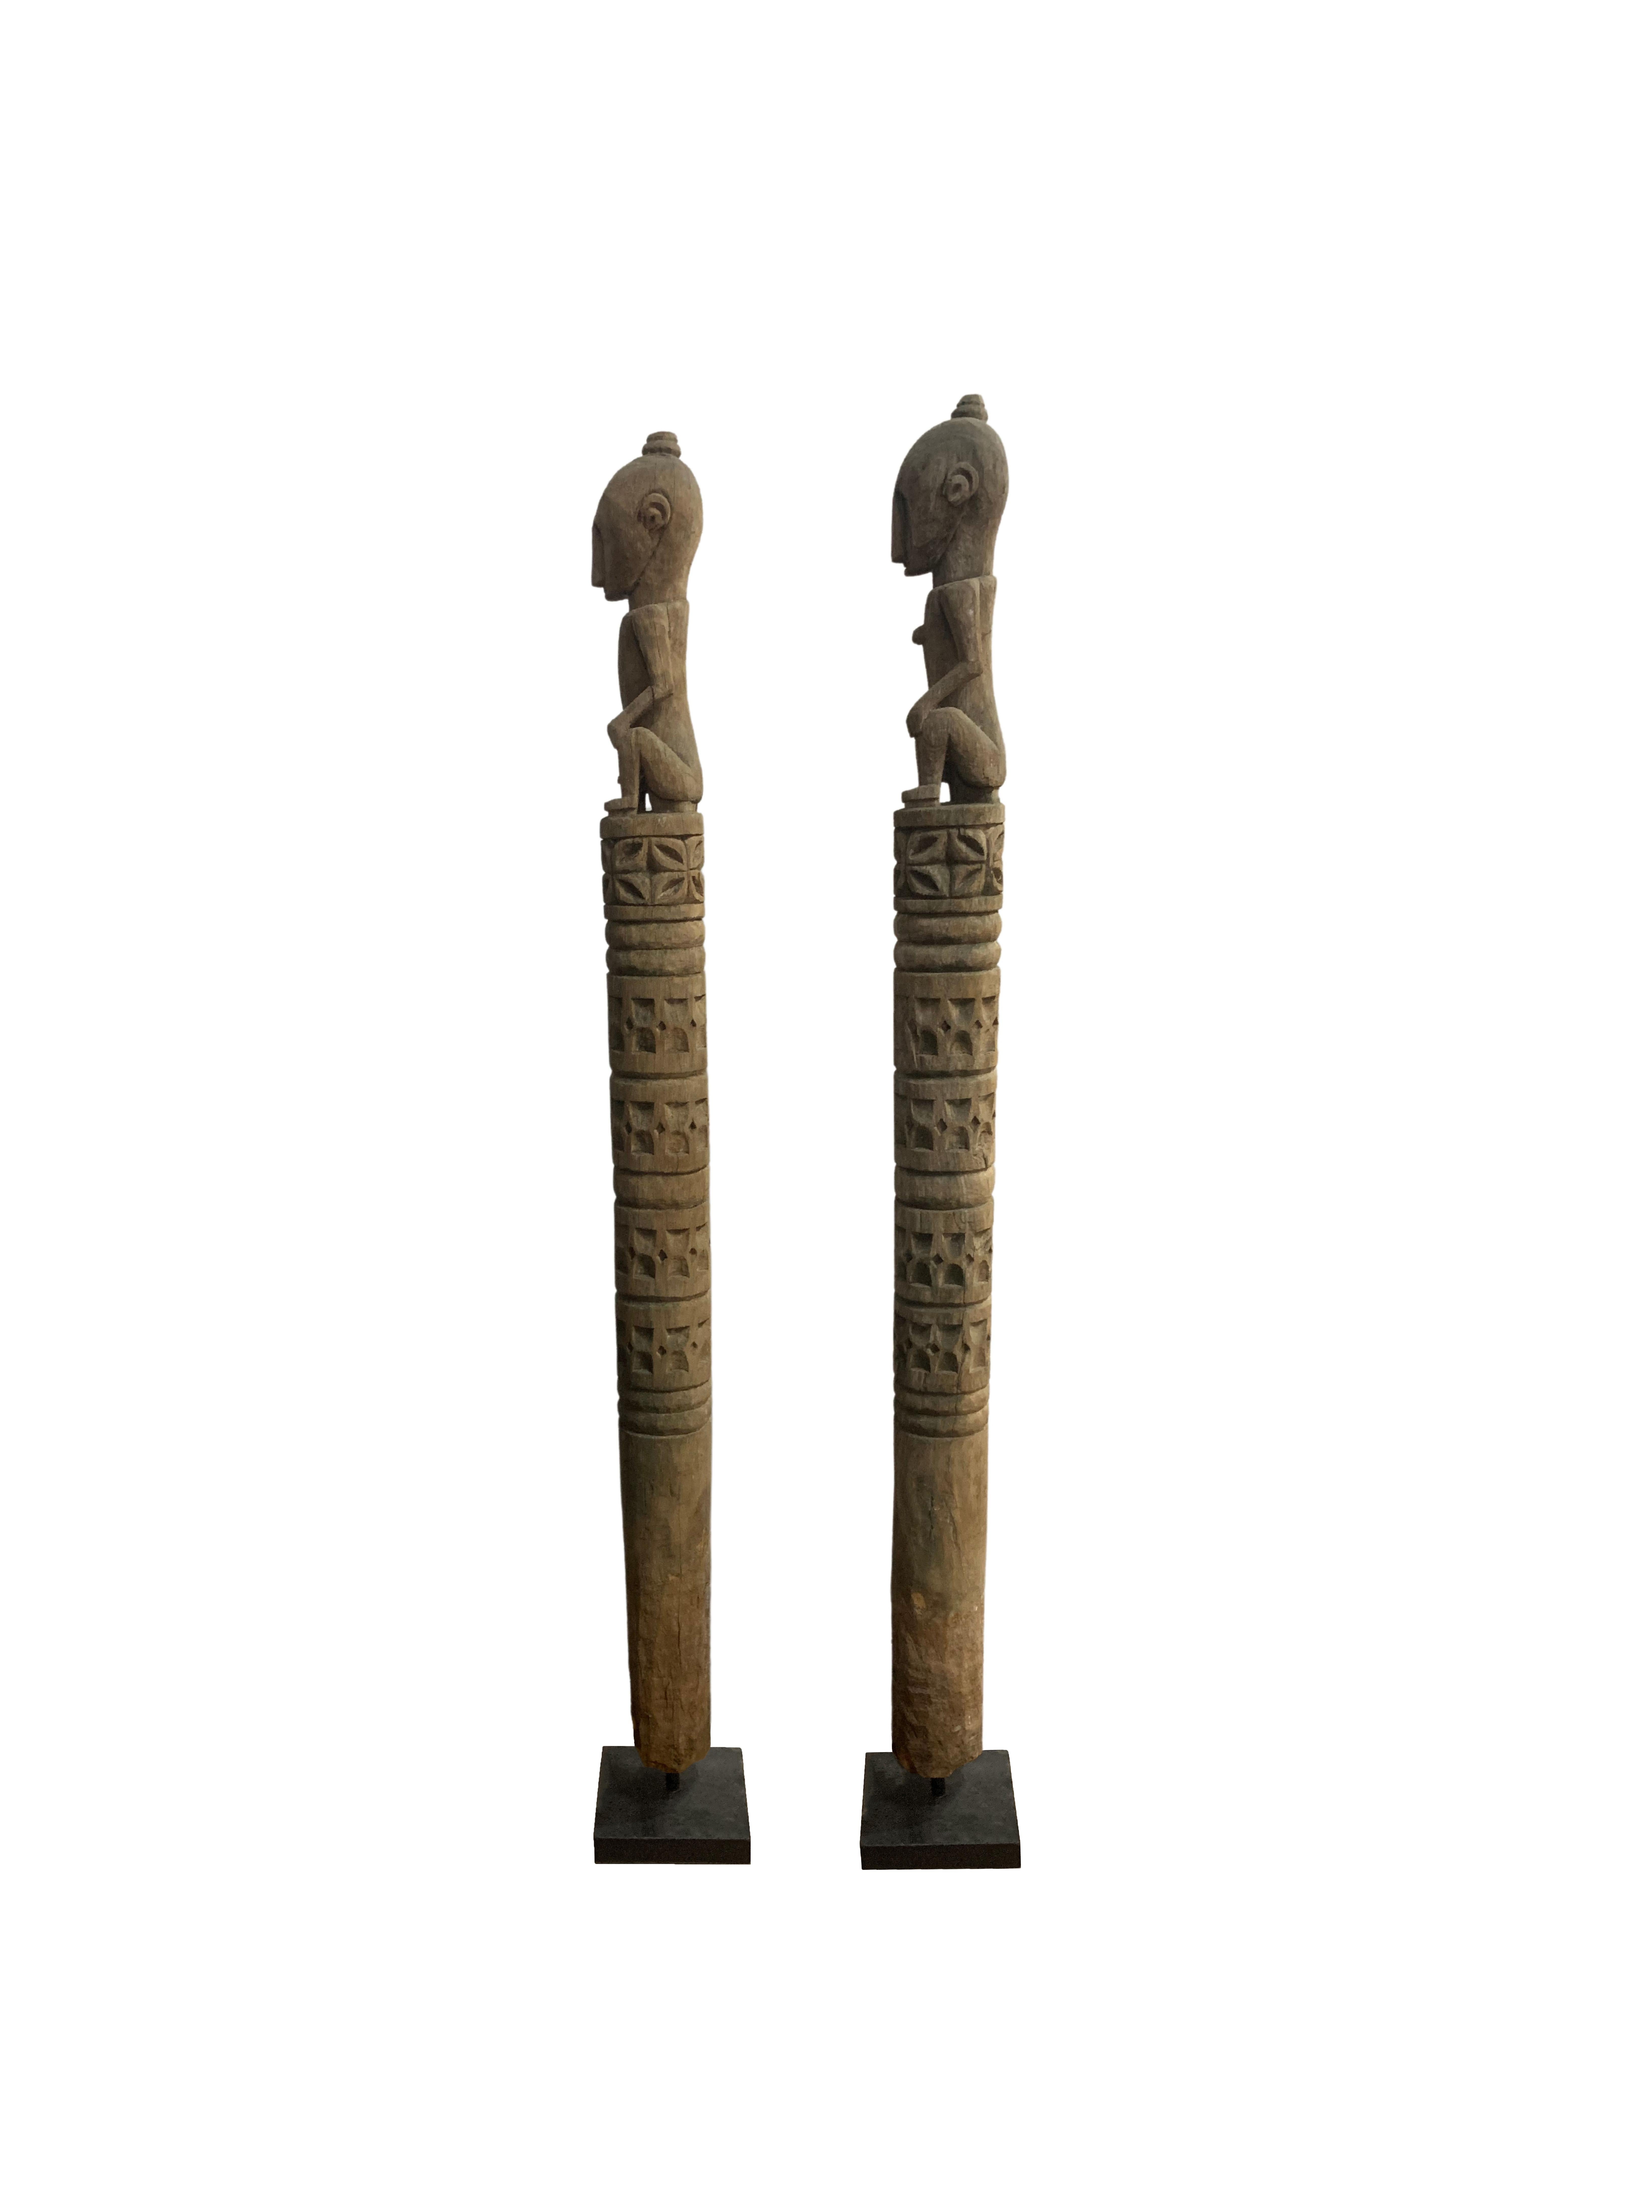 Indonesian Pair of Wooden Tribal Sculpture / Carving of Ancestral Figures, Timor, Indonesia